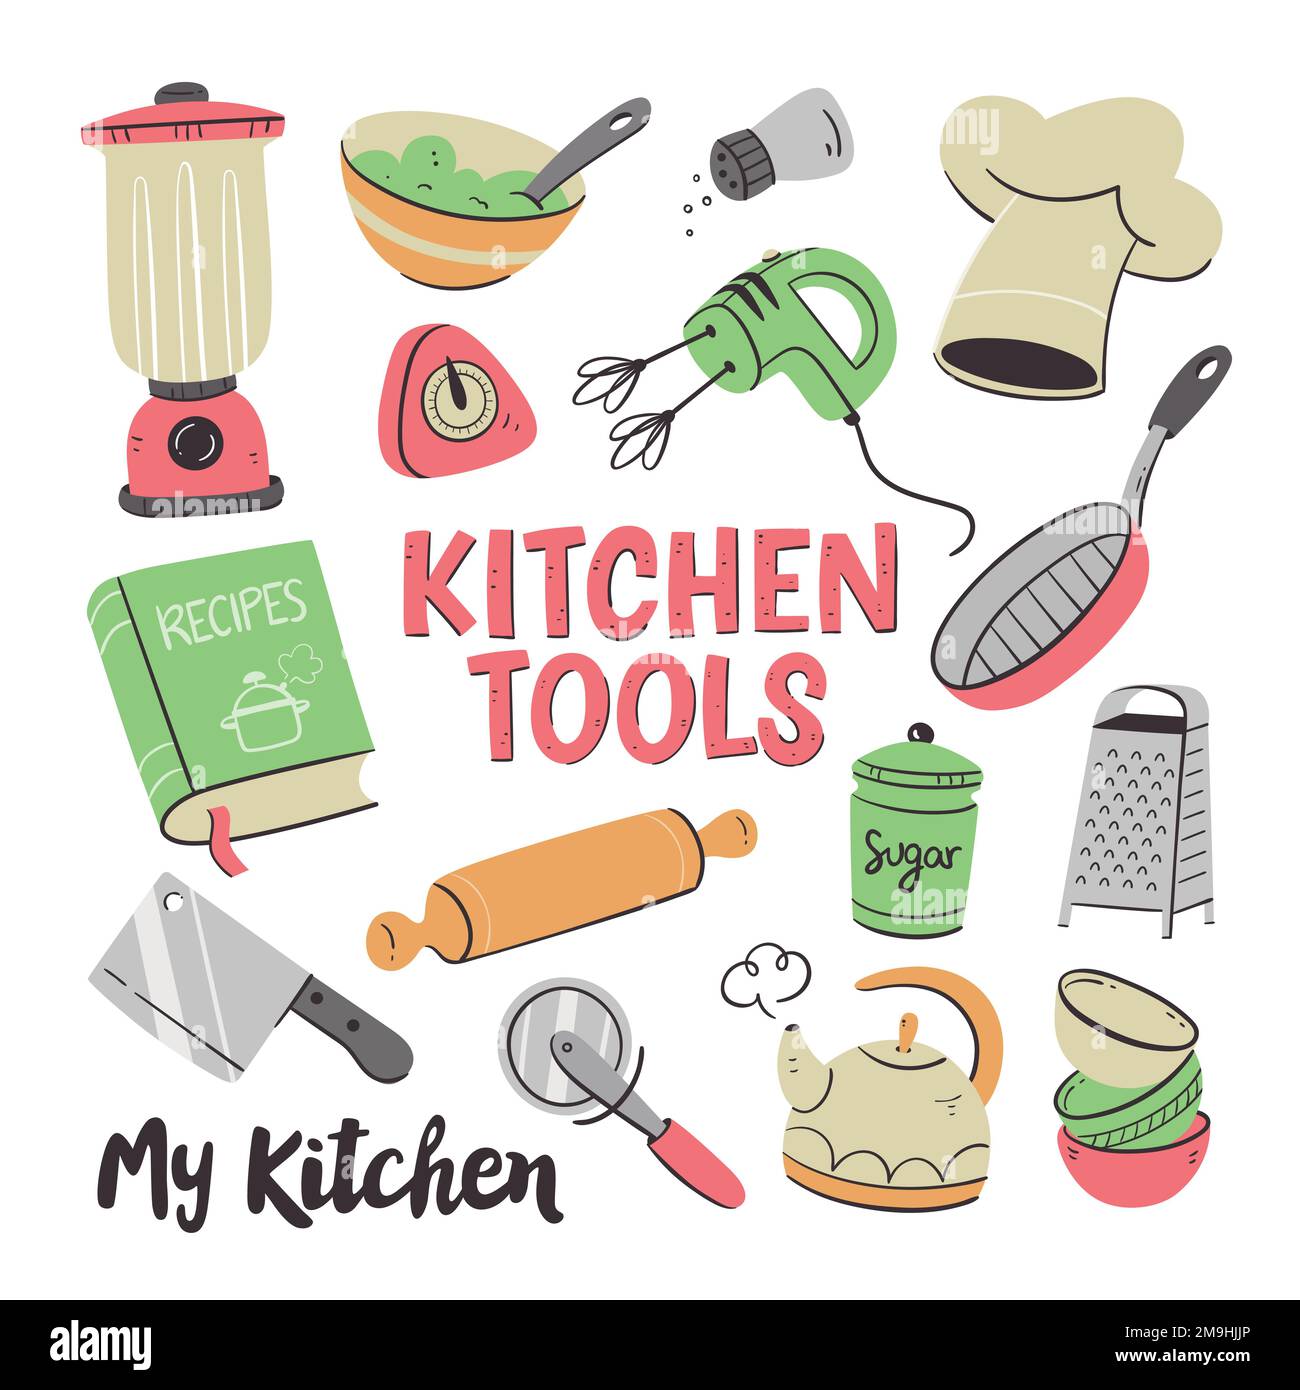 Kitchen tools and appliances. Cute illustration with isolated cooking objects in vector format. Kitchen utensils collection. Illustration 1 of 2. Stock Vector